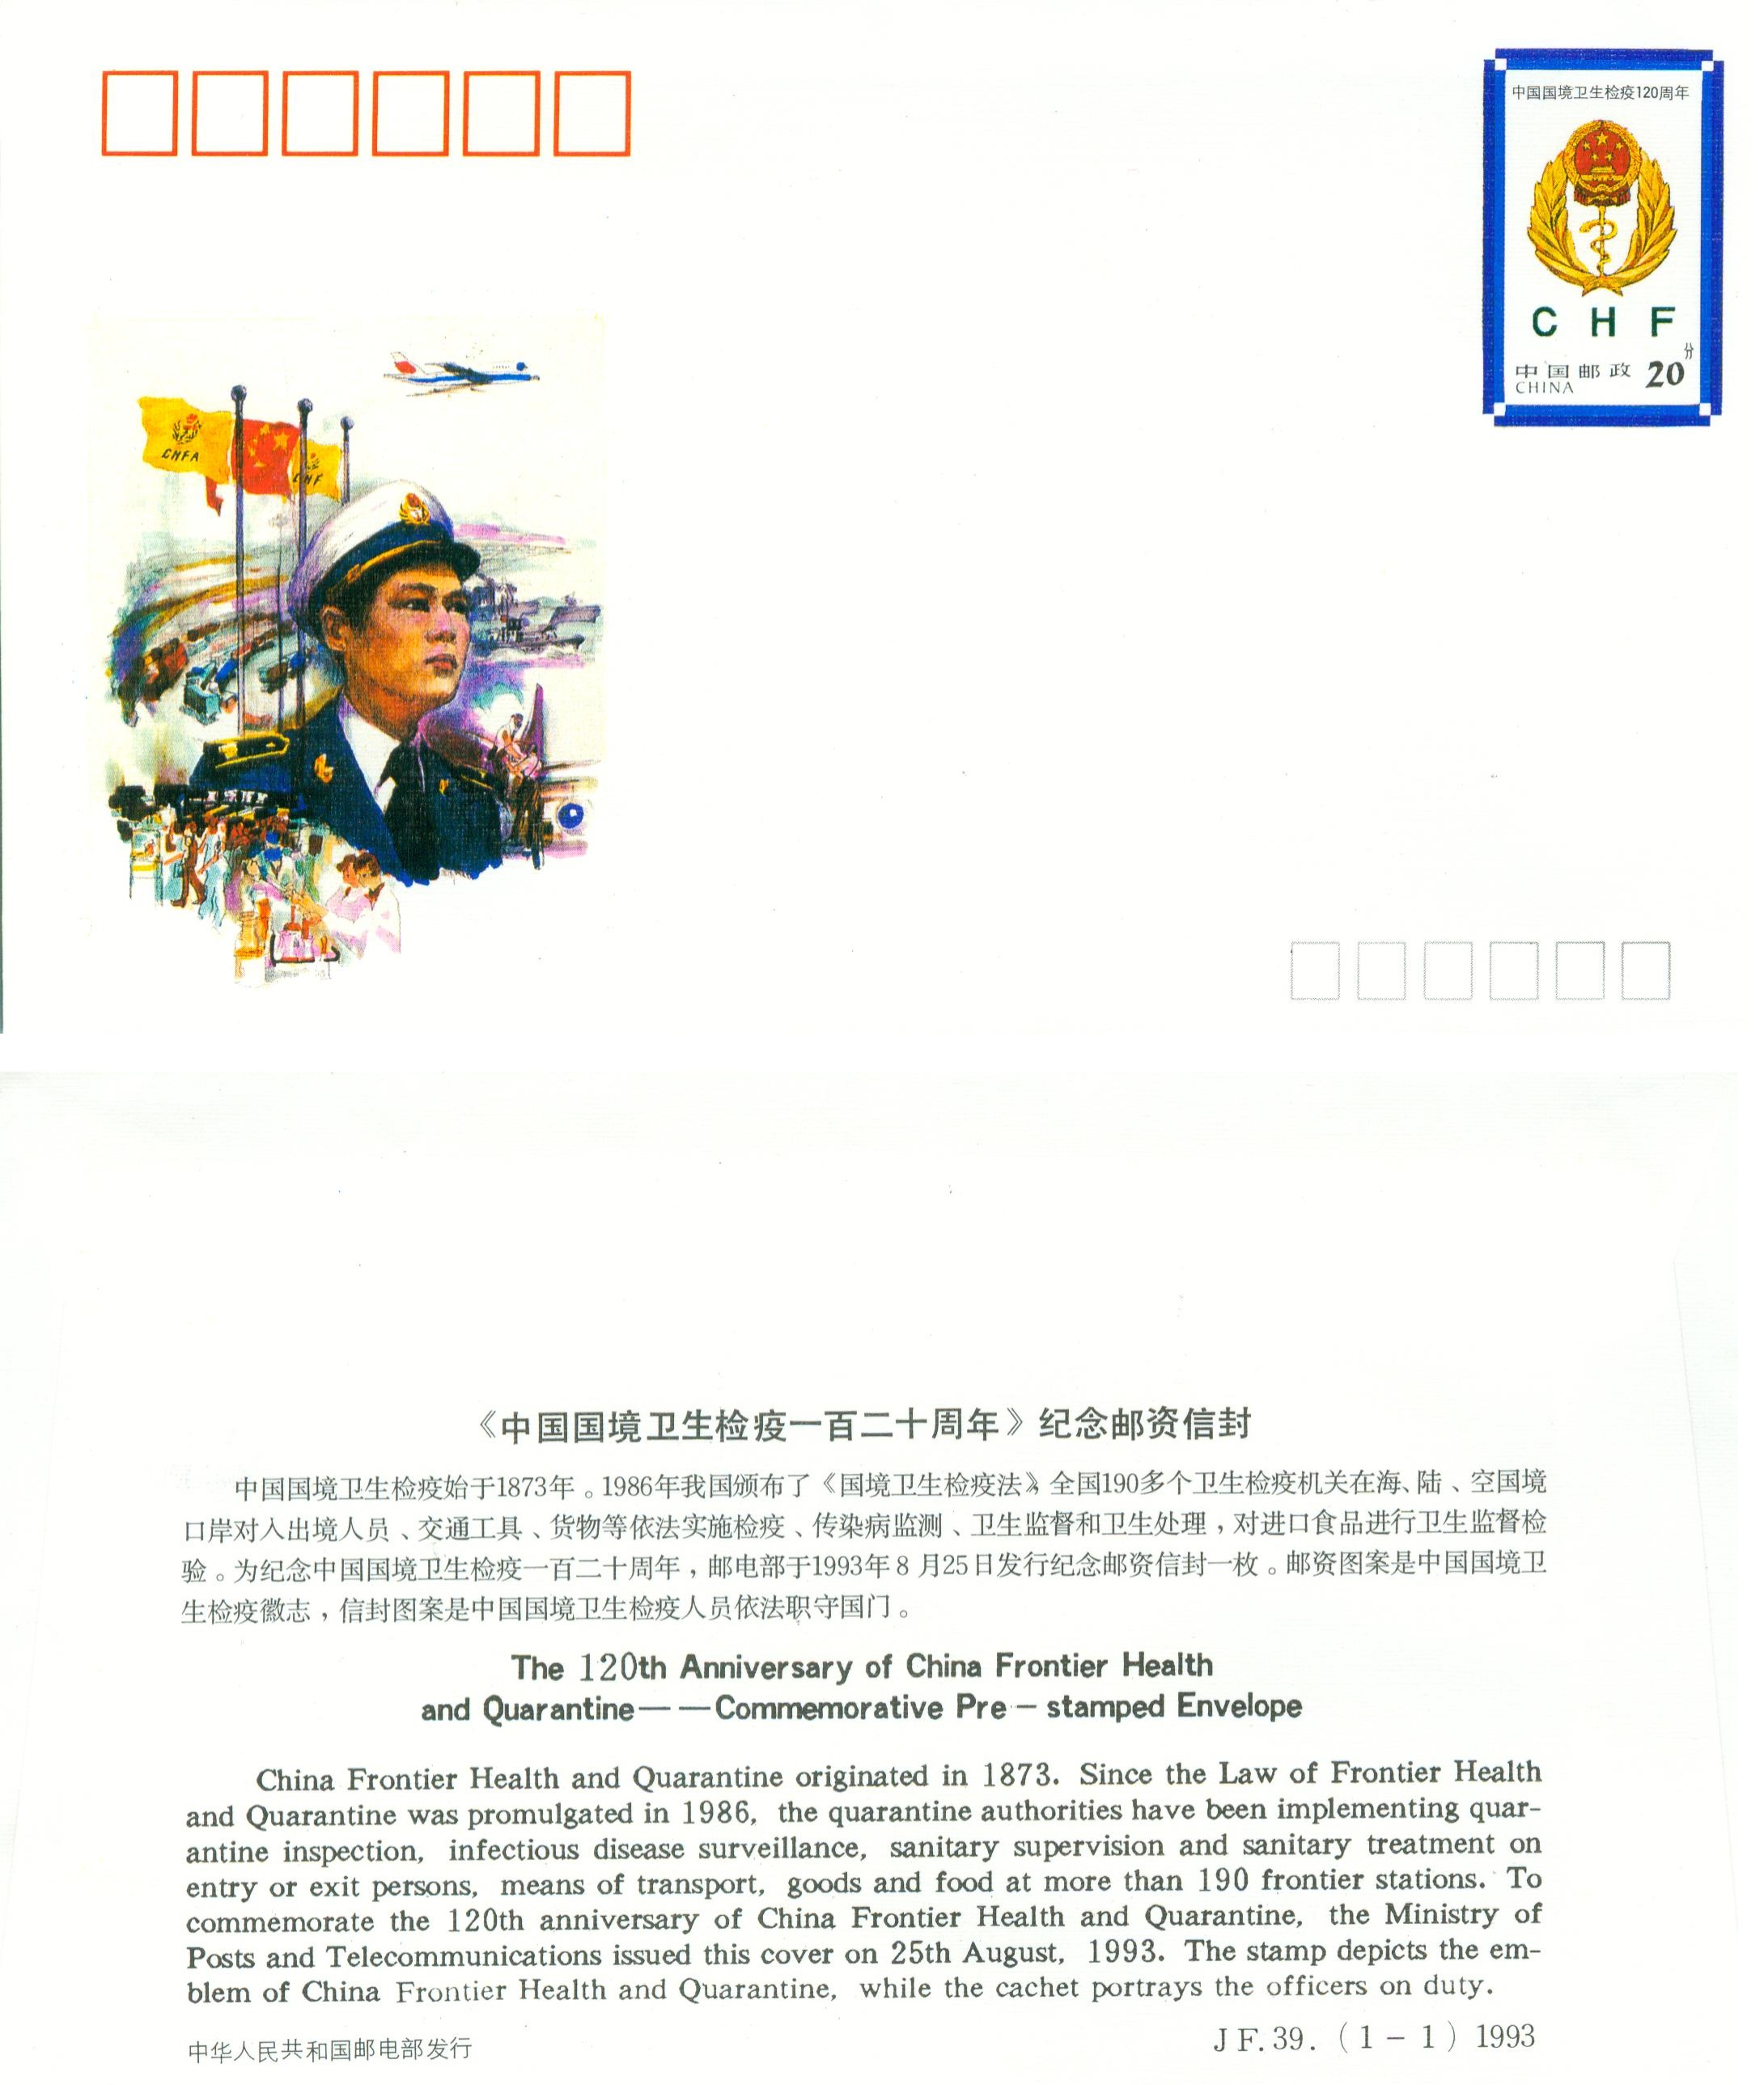 JF39, The 120th Anniversary of China Frontier Health 1993